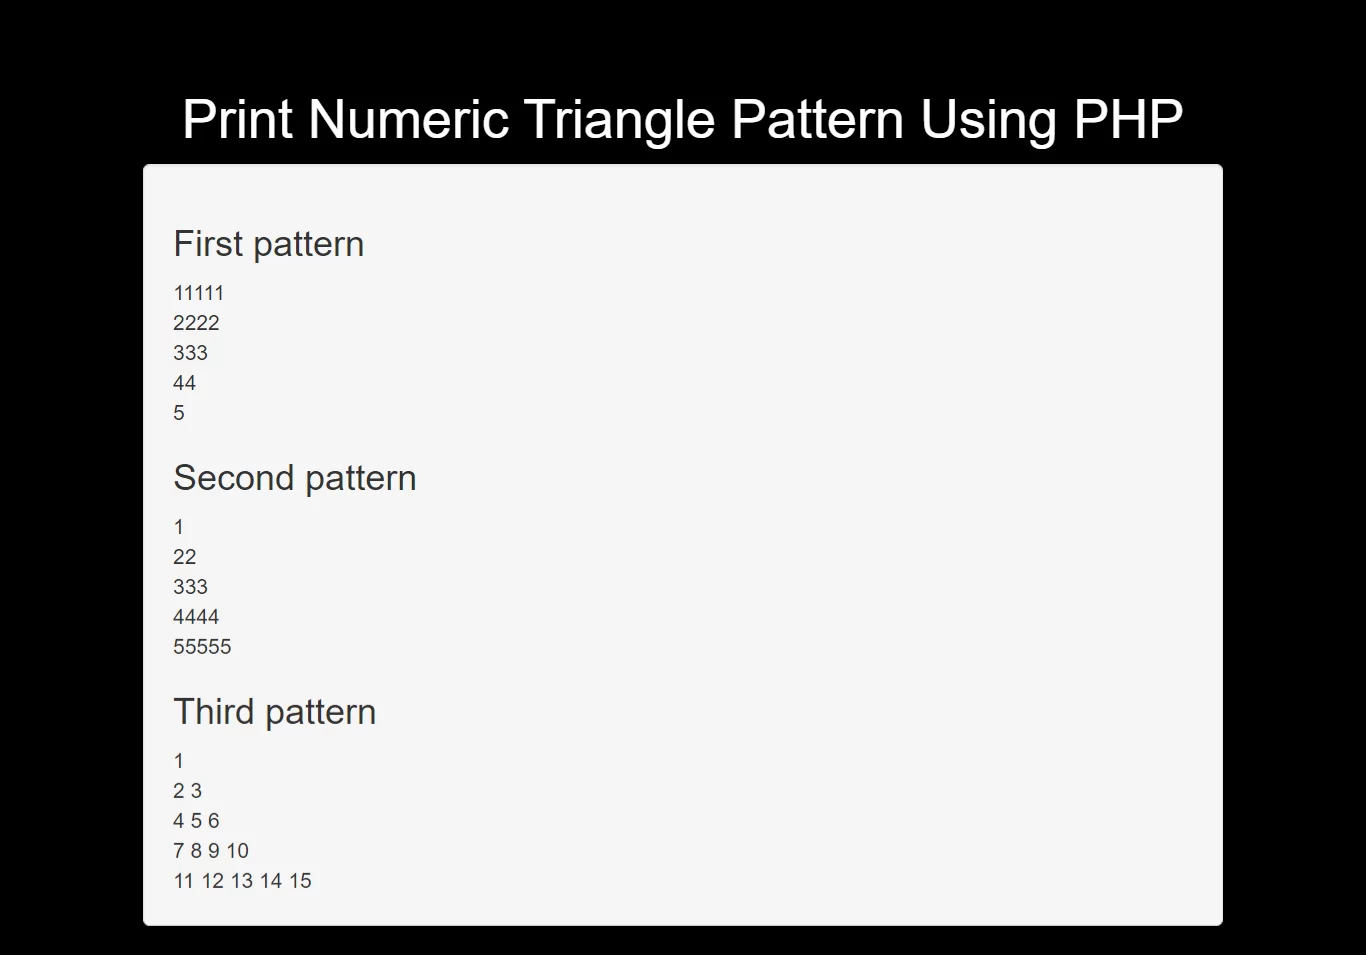 How Can I Print Numeric Triangle Pattern Using PHP